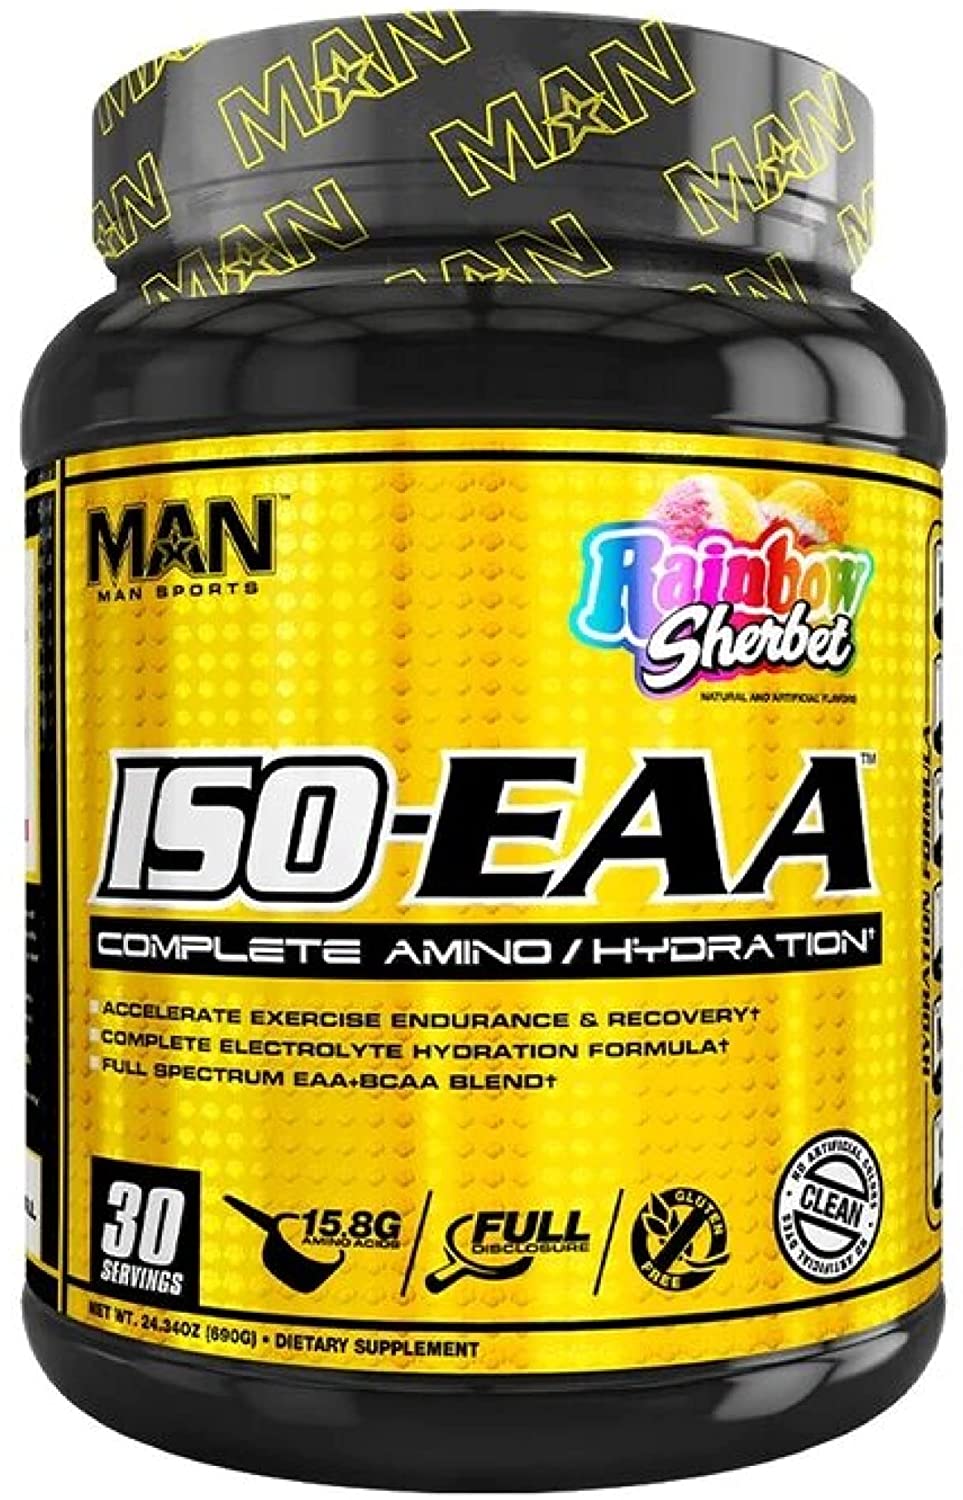 Man Sports ISO-EAA - Advanced Electrolyte Hydration, BCAA, and EAA - Branched Chain Amino Acids and Essential Amino Acids - Prevent Muscle Soreness - 690 Grams, 30 Servings - Rainbow Sherbet - image 1 of 4